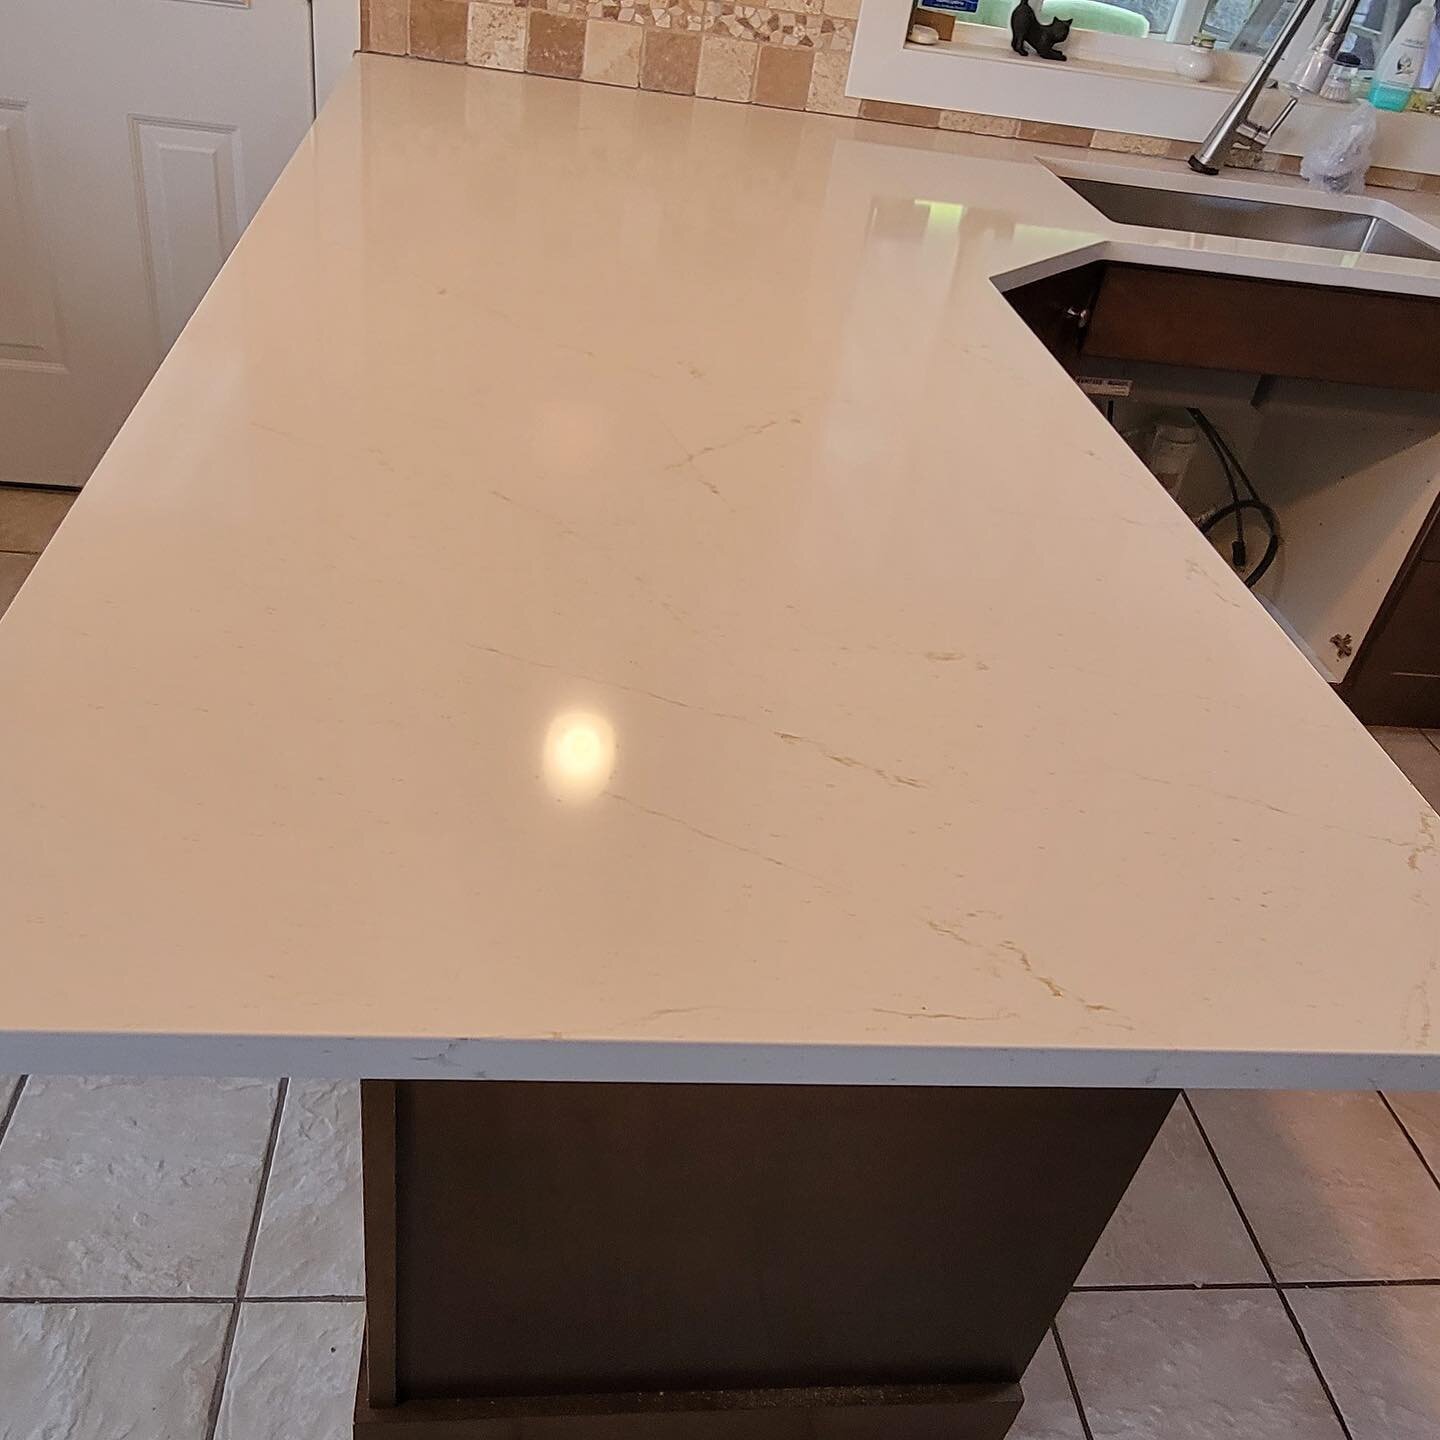 When working with pre-existing designs: update your countertops to meet tones but also provide a fresh look! This kitchen was revitalized with Silestone Eternal Marfil Quartz Countertops. 
.
.
.
.
.
.
#revitastone #revitastonecountertopskelowna #sile